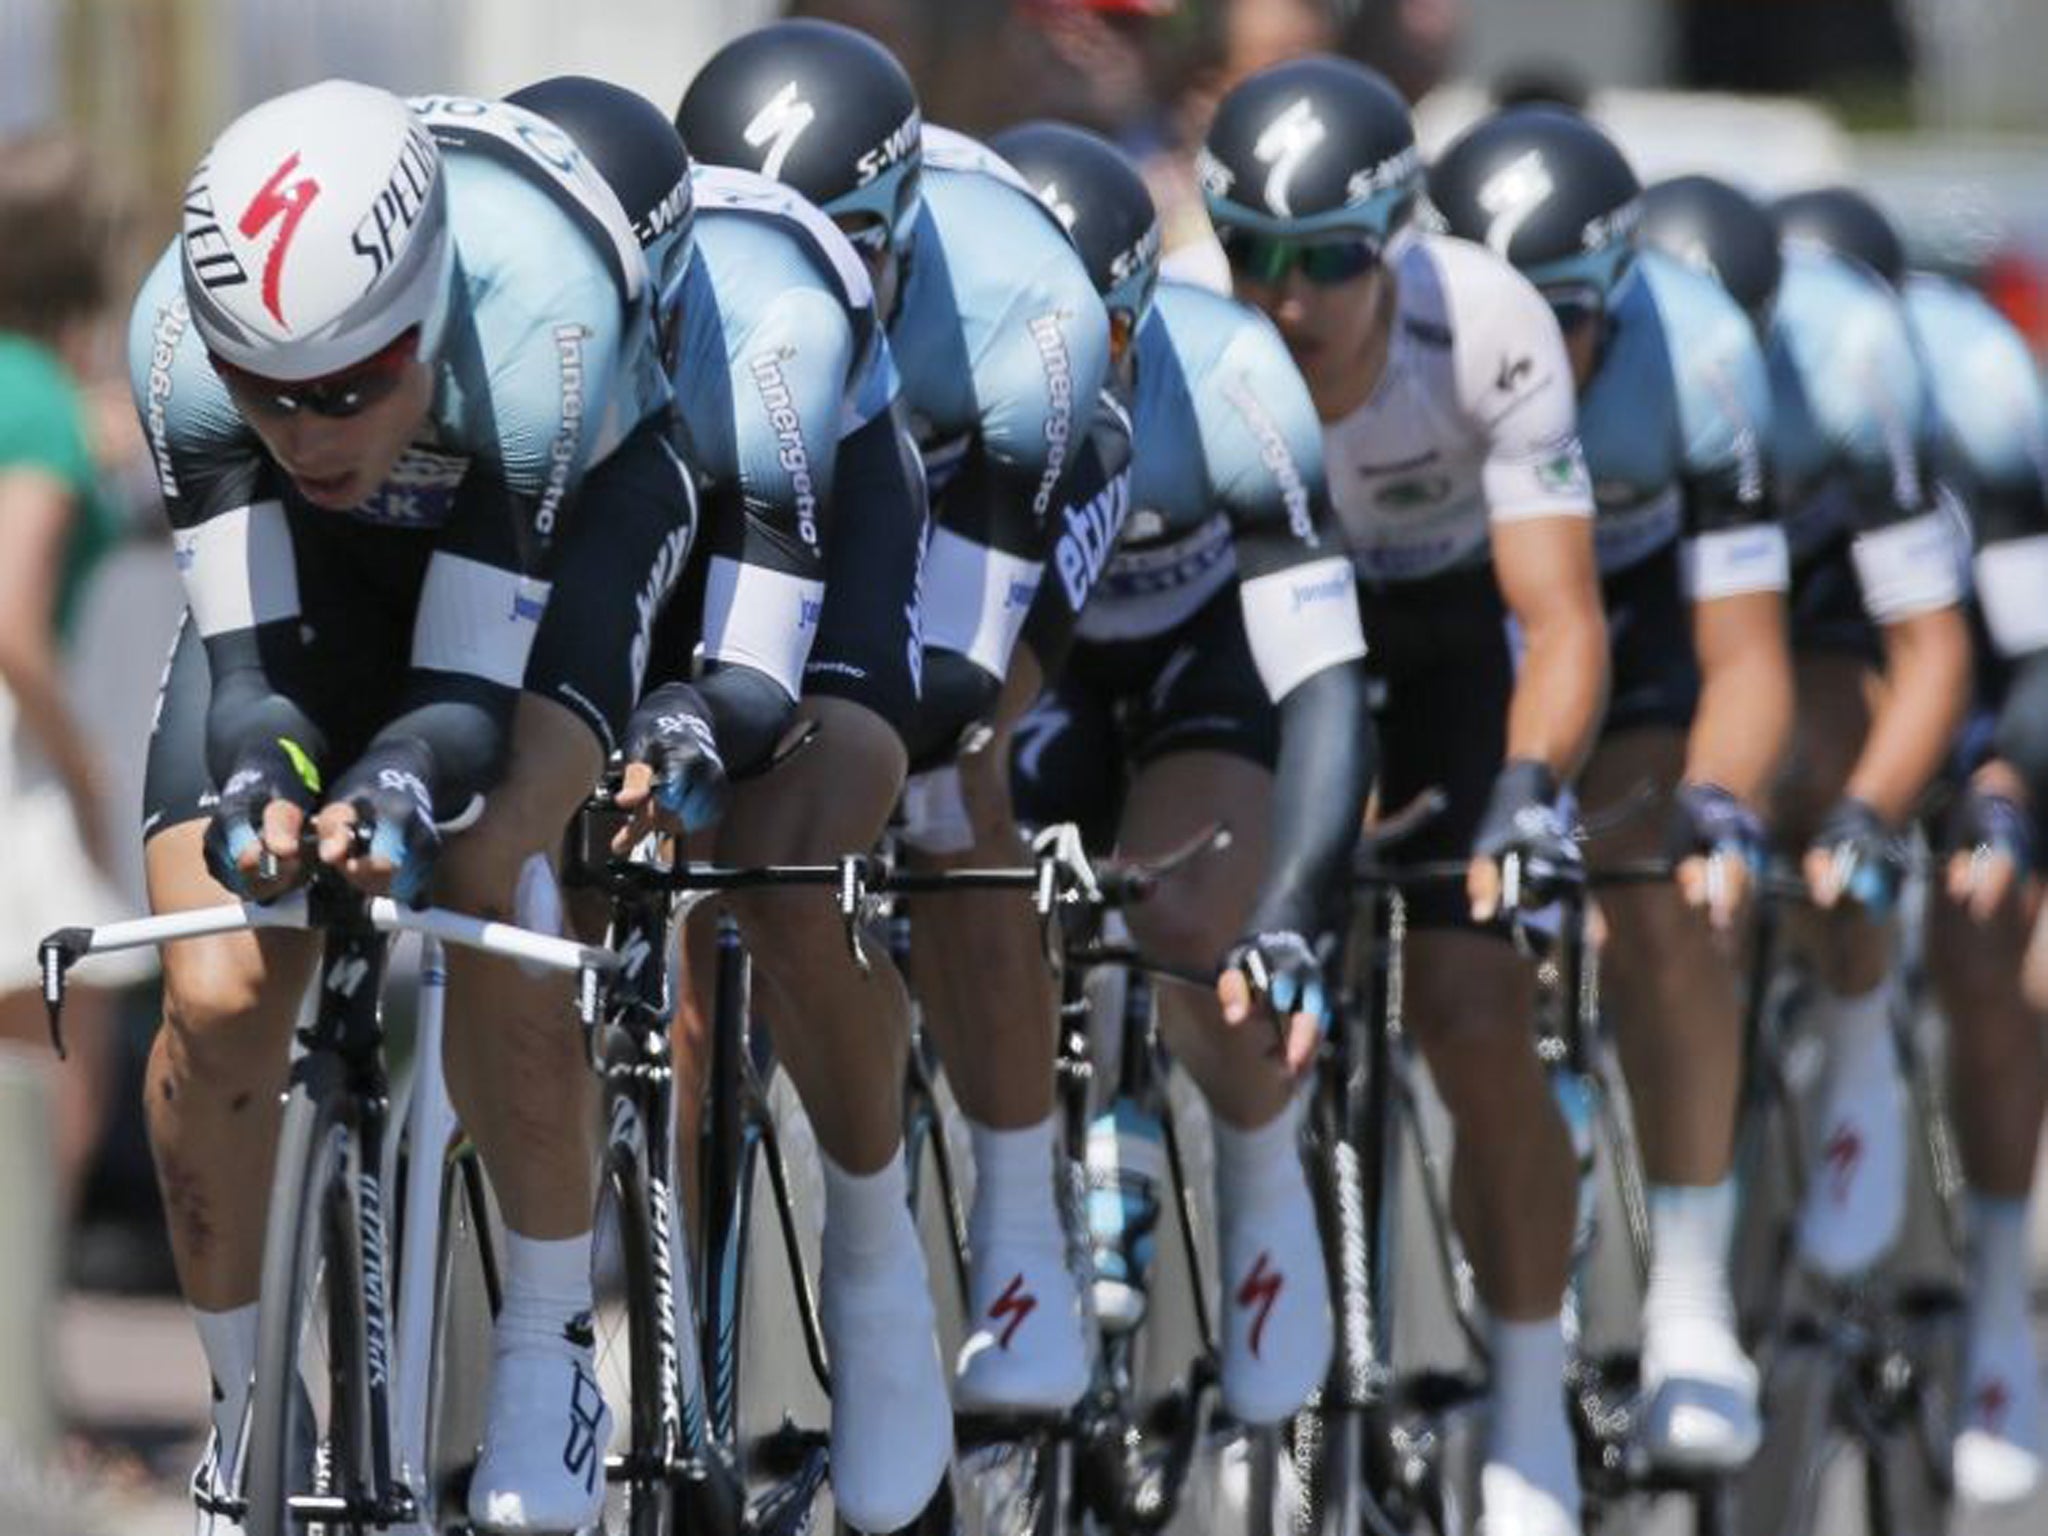 Team Omega Pharma-Quick Step rides during the fourth stage of the Tour de France cycling race, a team time-trial over 25 kilometers